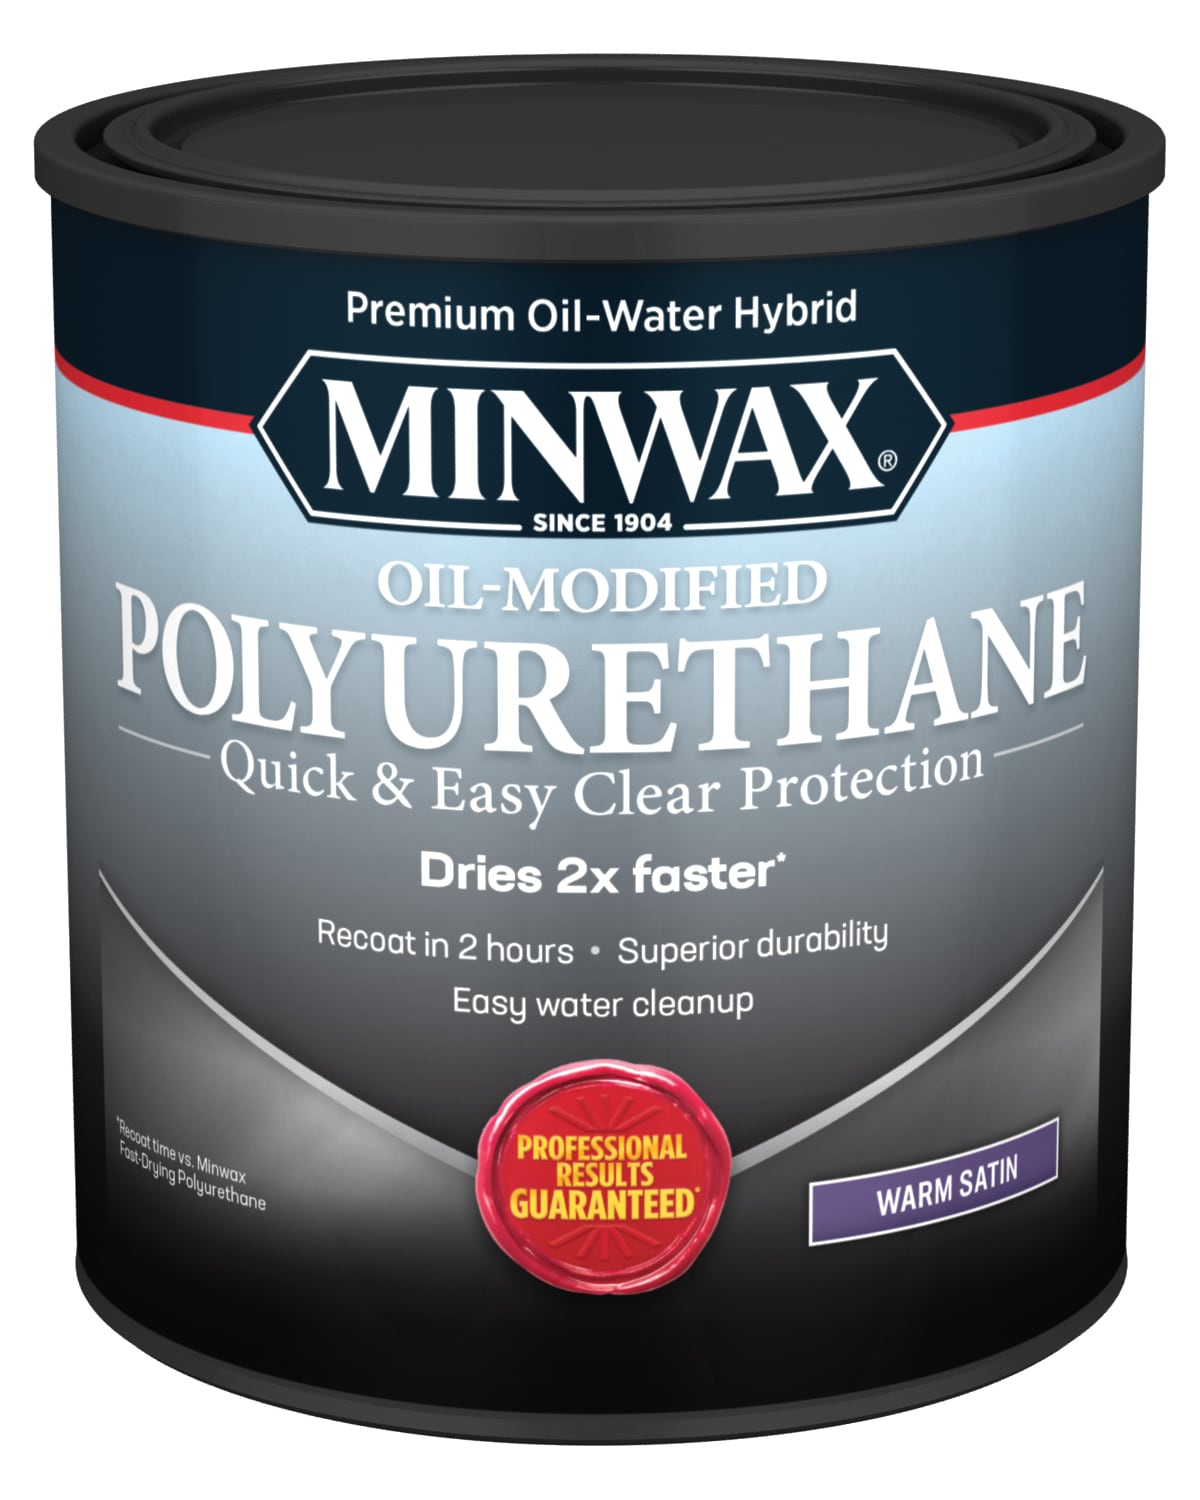 How To Get Rid Of Polyurethane Smell: Quick & Easy Fixes